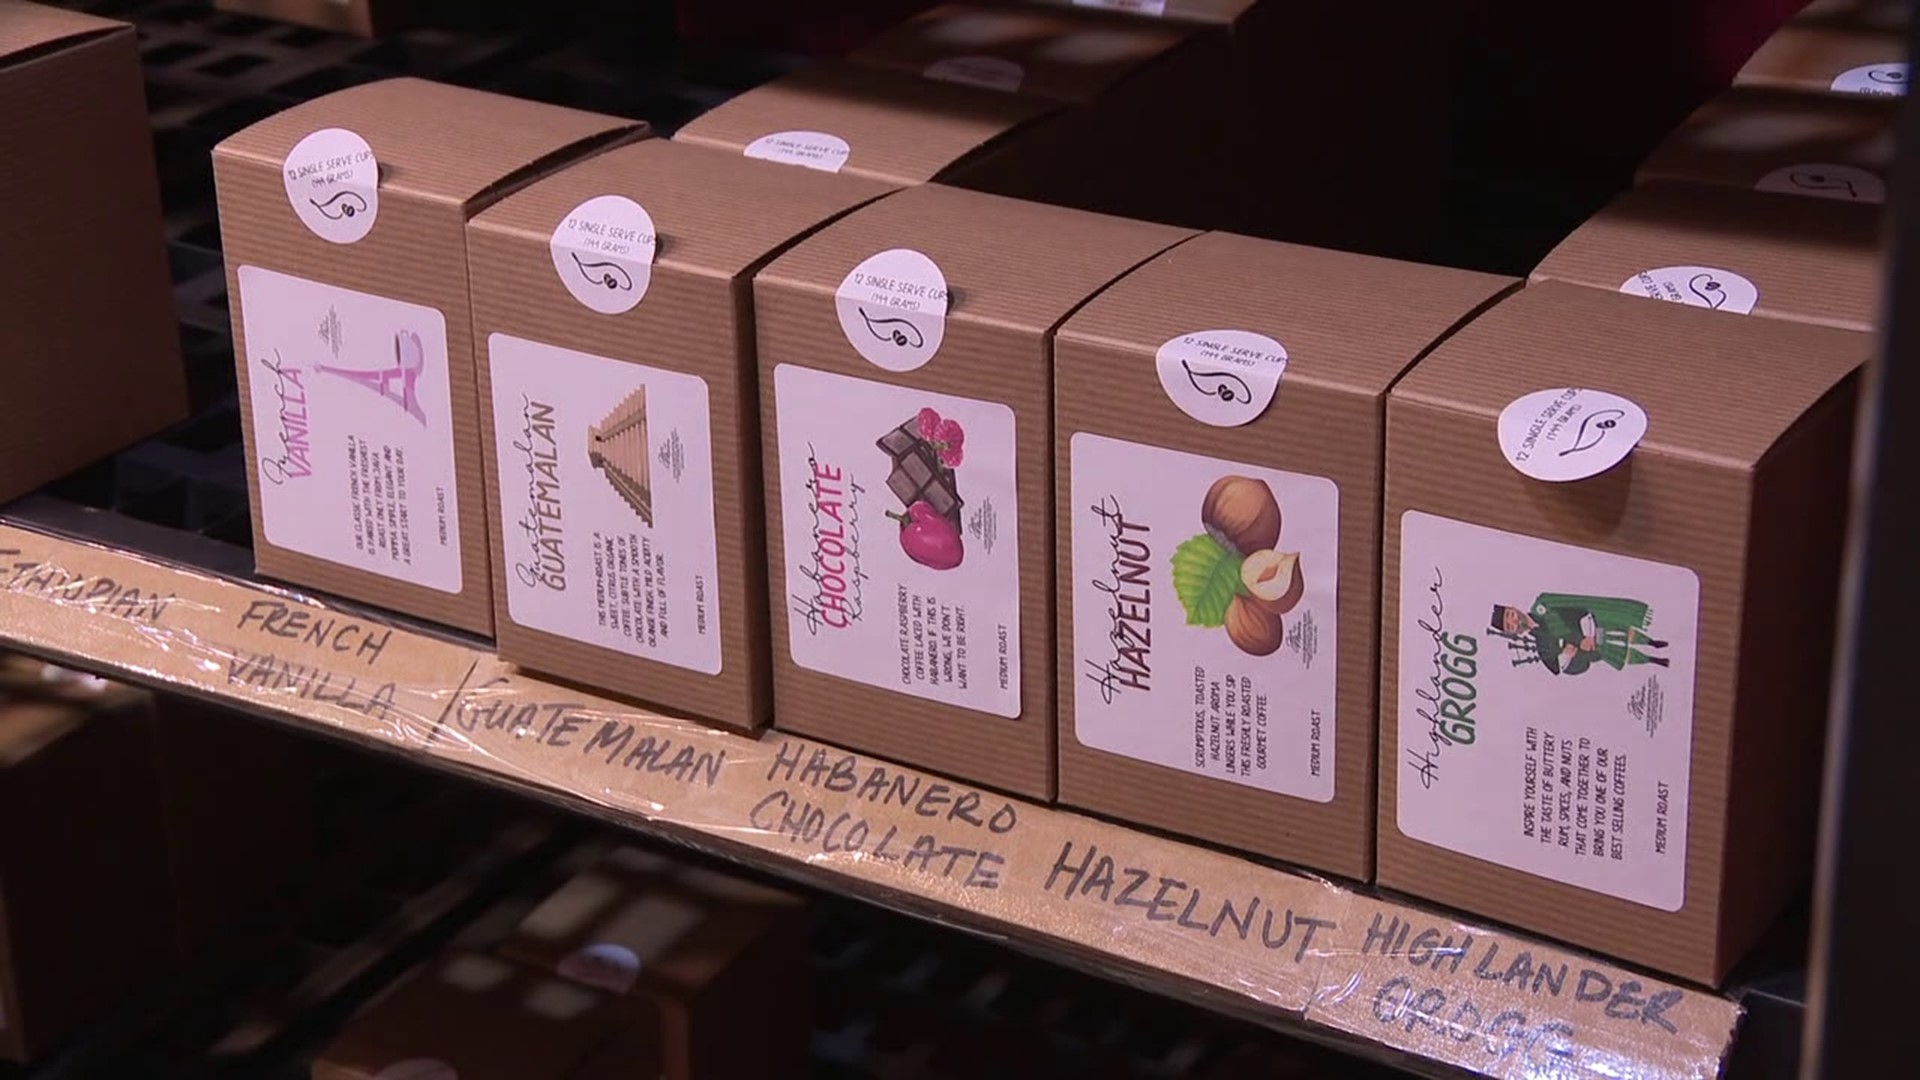 A coffee company based in Danville is one of the "World's Greatest" when it comes to direct sales.